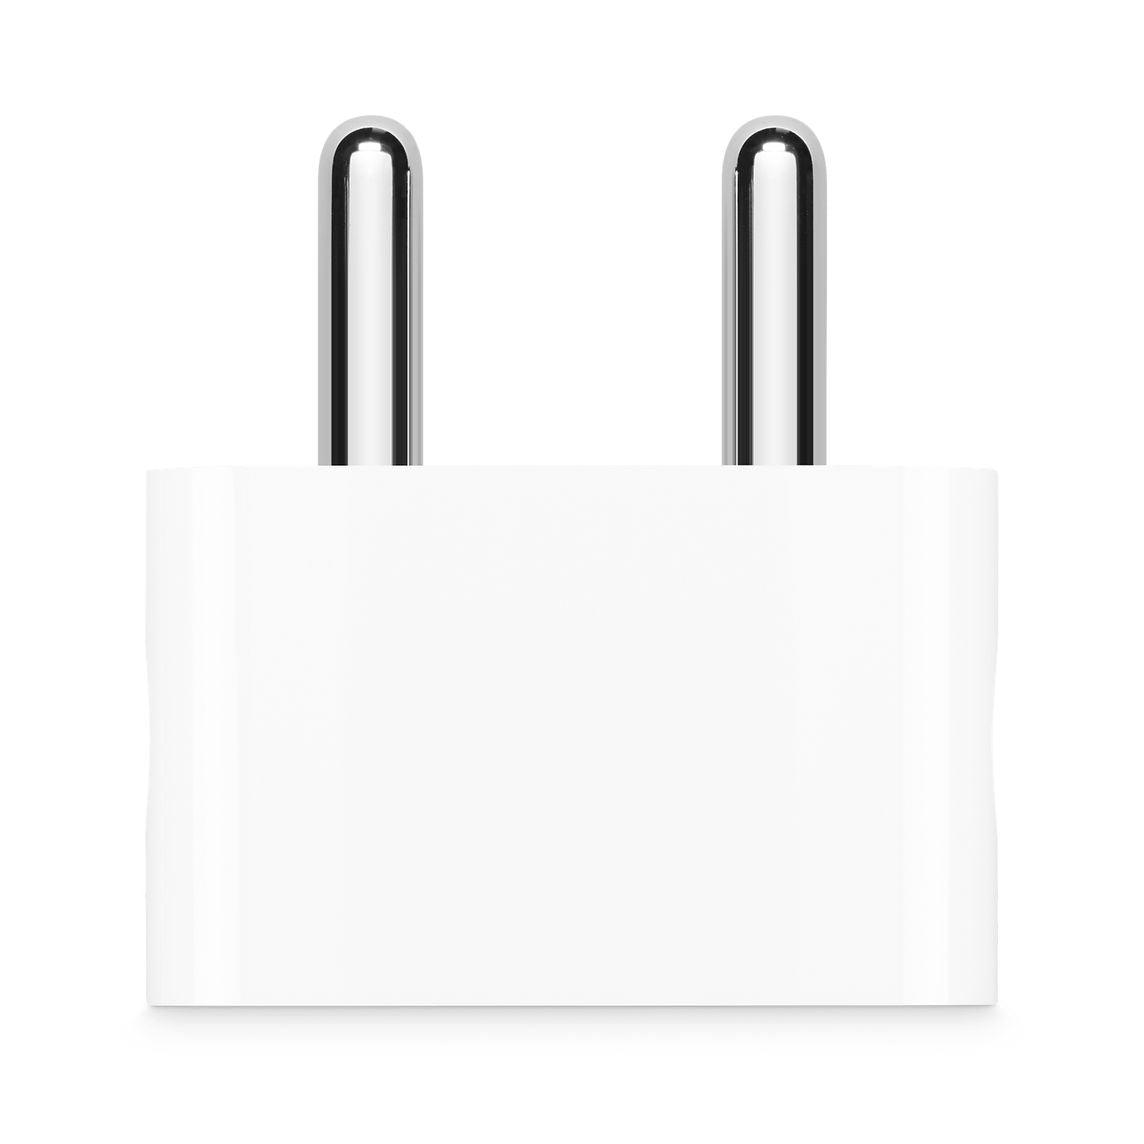 Apple 5W USB Power Adapter - Grab Your Gadget